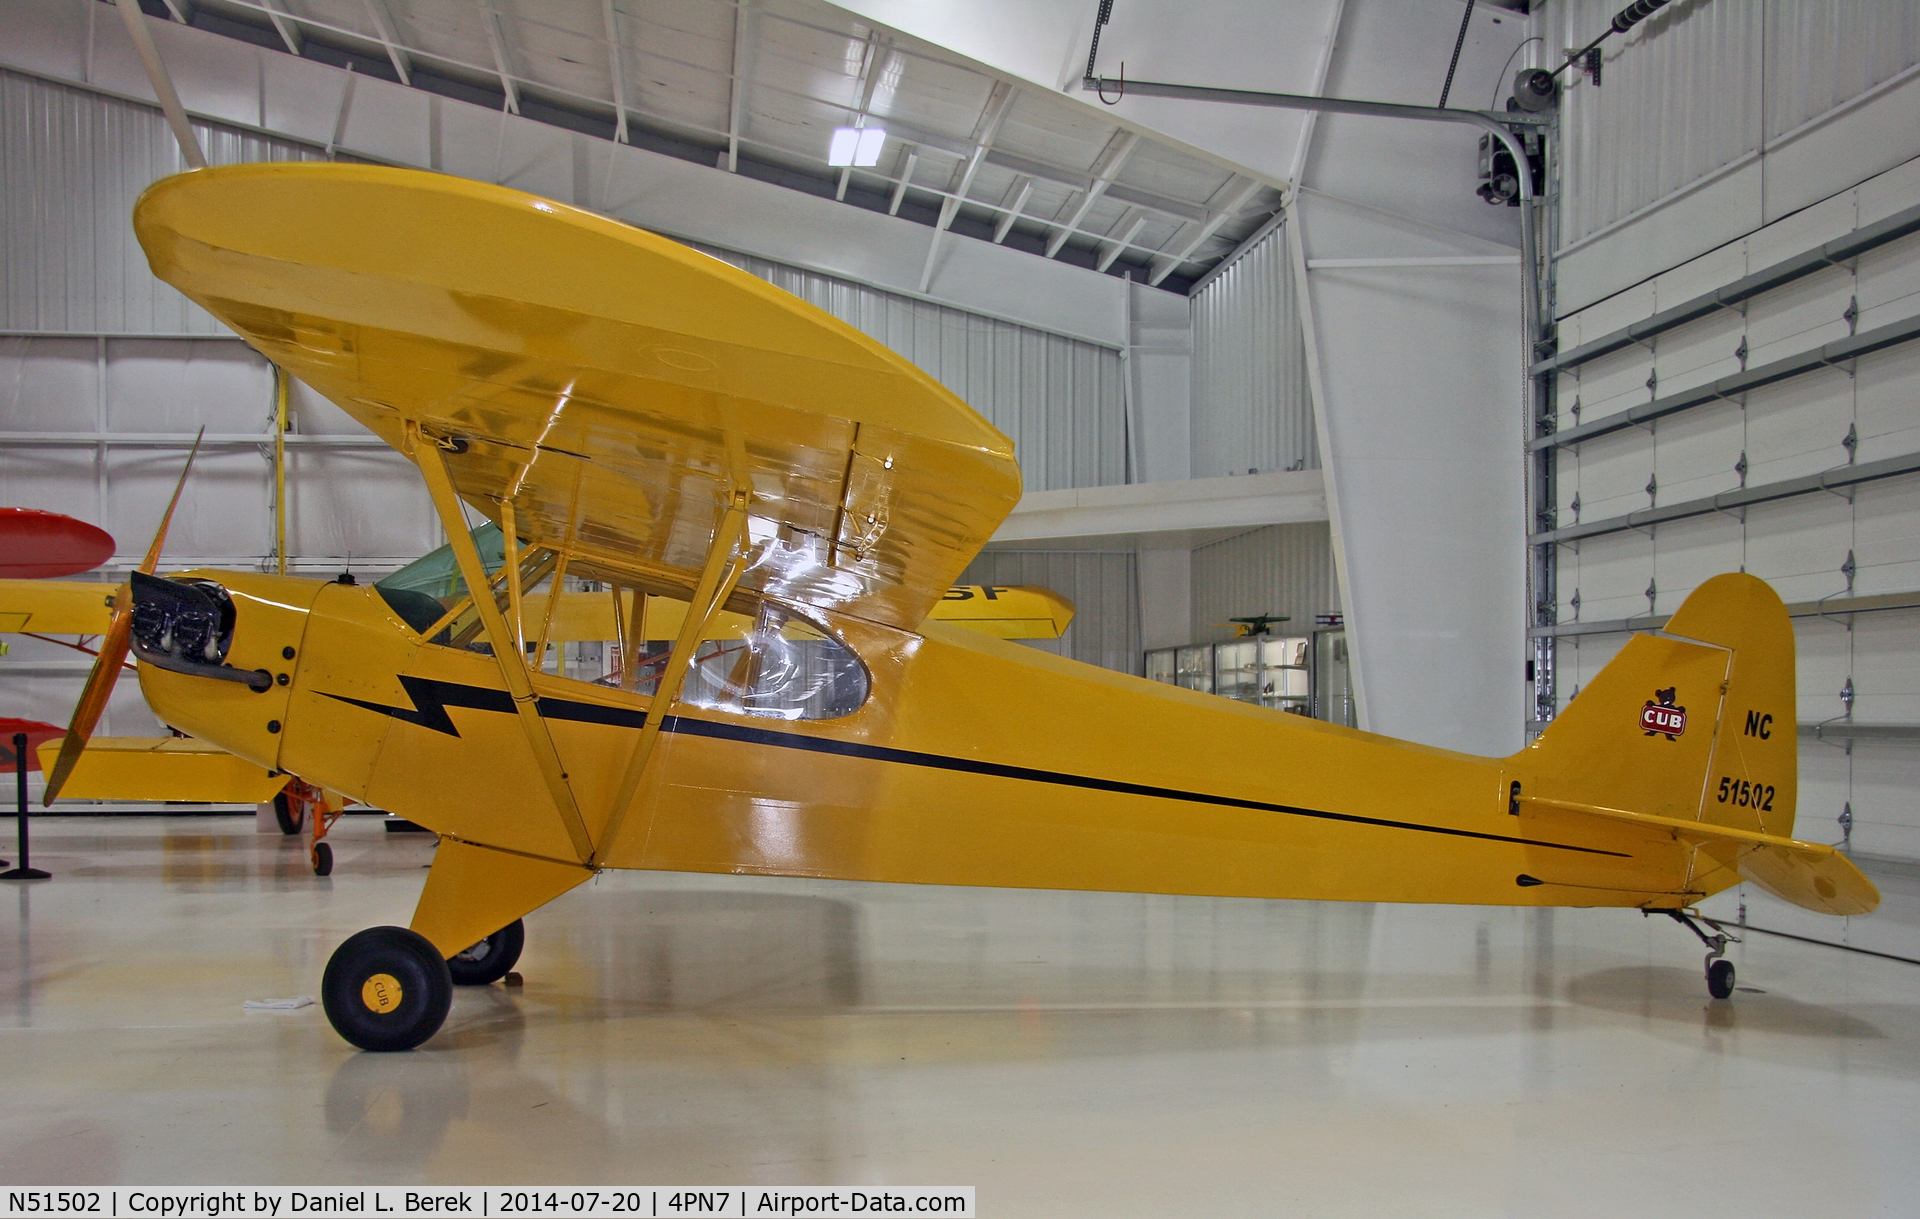 N51502, 1942 Piper J3C-65 Cub Cub C/N 9790, This Piper Cub is now part of the Eagle's Mere Air Museum Collection.  When she's not flying, she is a prominent display in this new museum.